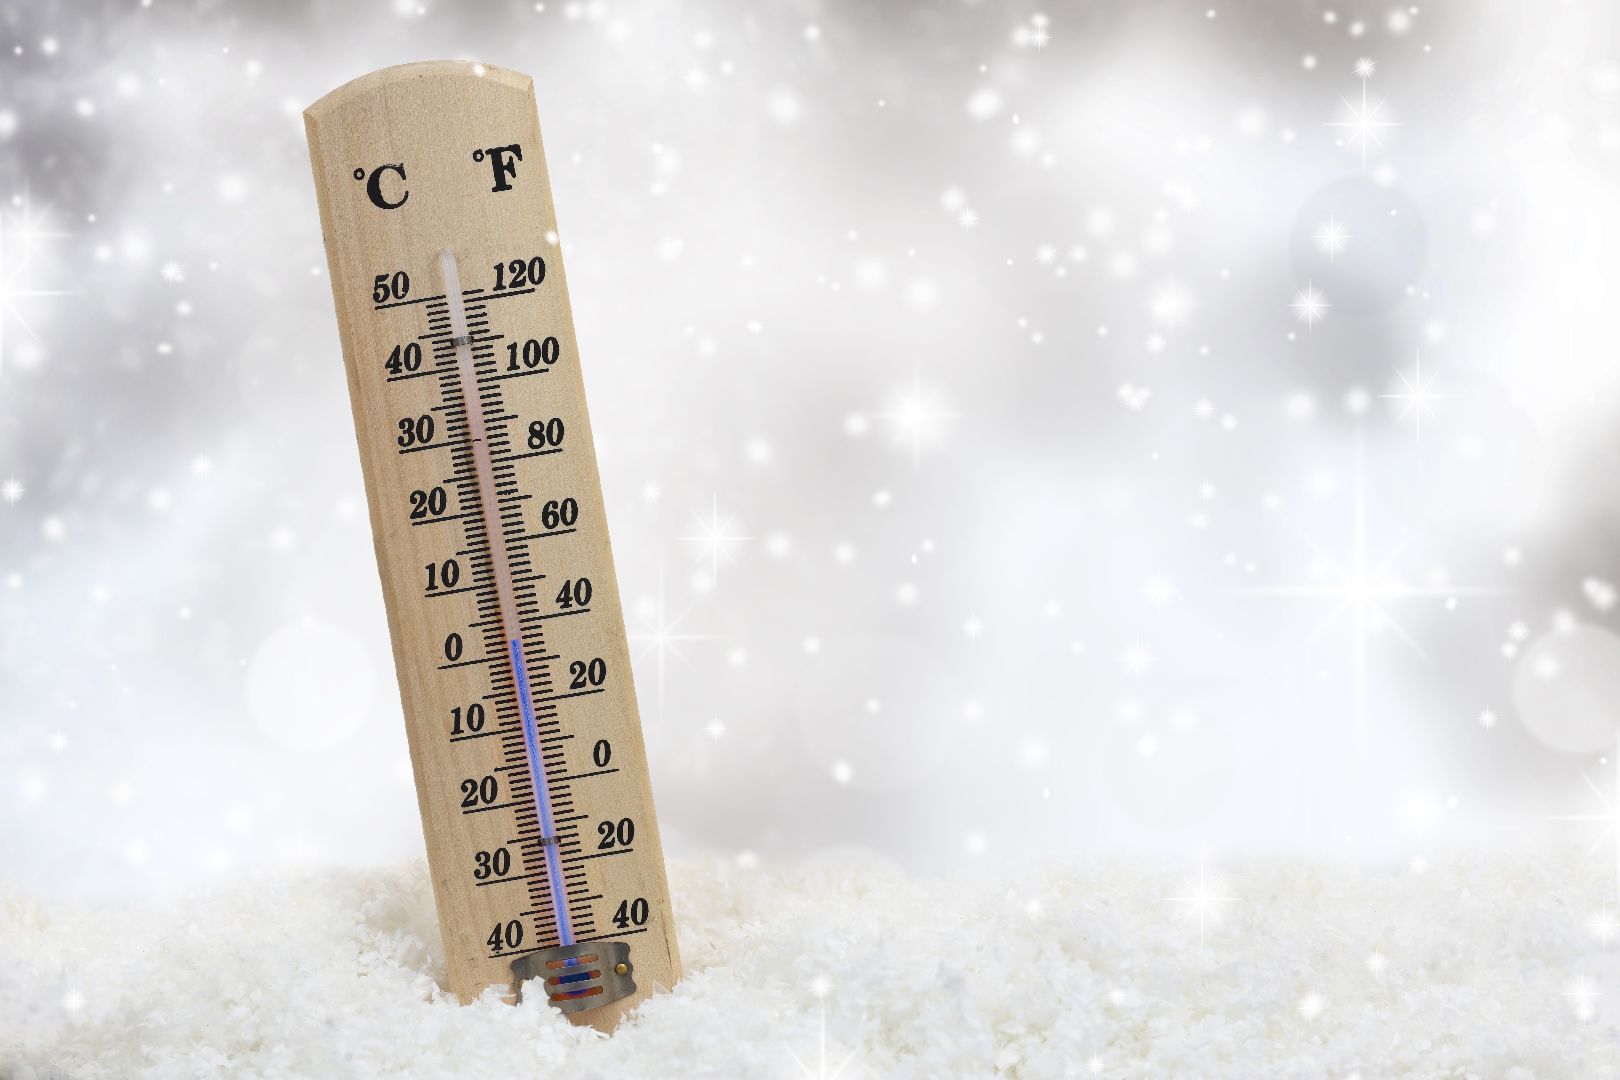 A stock photo depicting a thermometer in a heap of snow